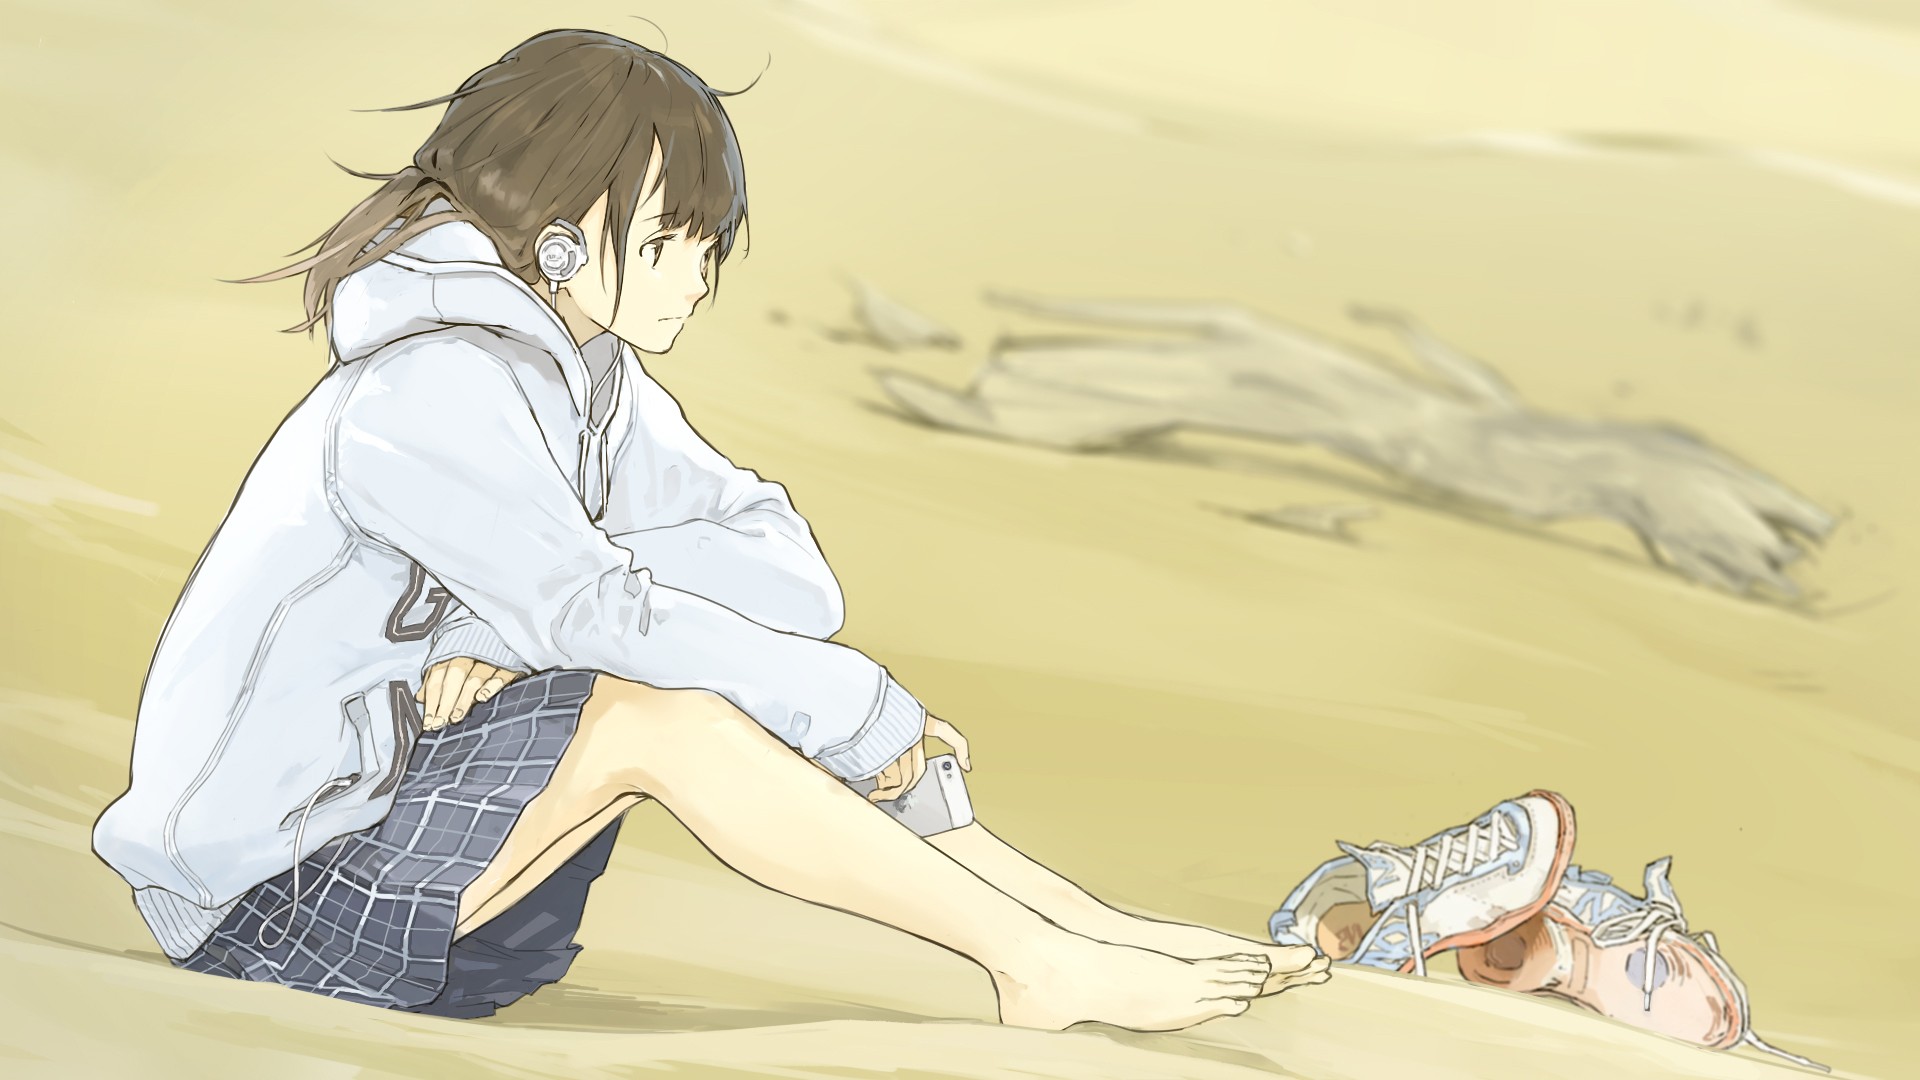 Anime 1920x1080 anime girls barefoot anime hooded jacket original characters shoes loundraw headphones brunette women outdoors beach skirt feet sitting pointed toes phone sand hoods